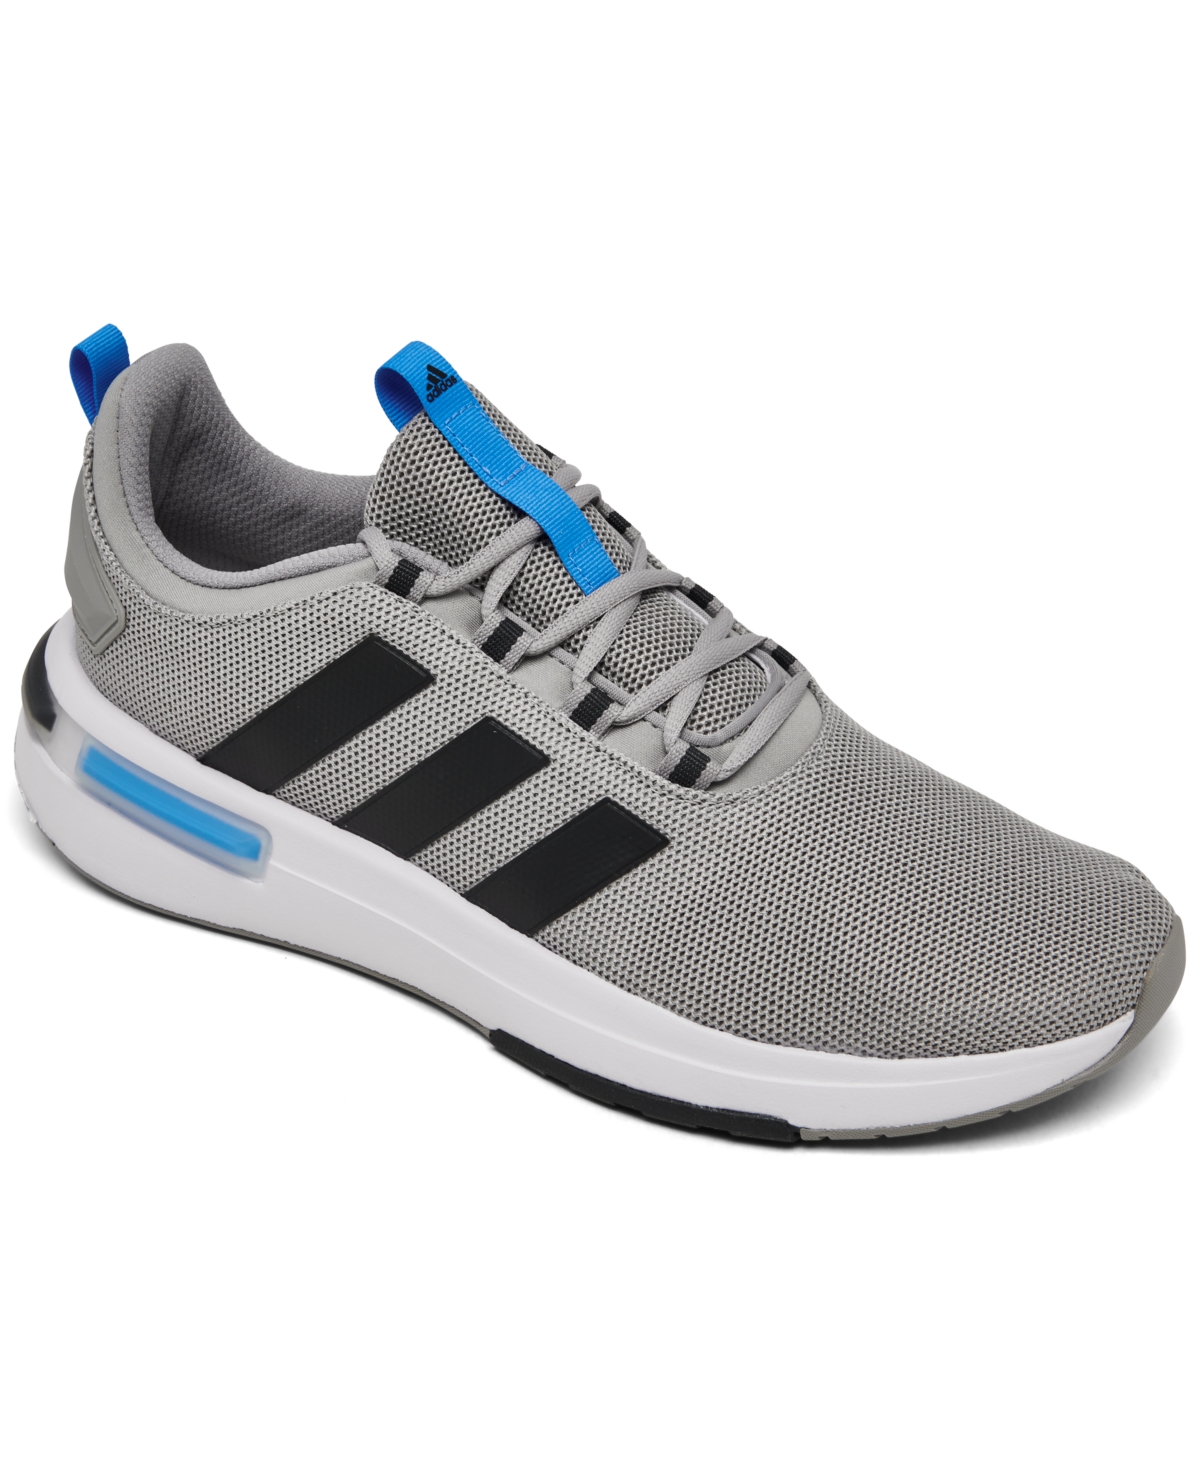 Men's Racer TR23 Running Sneakers from Finish Line - MGH GREY/CARBON/BLUE BURS